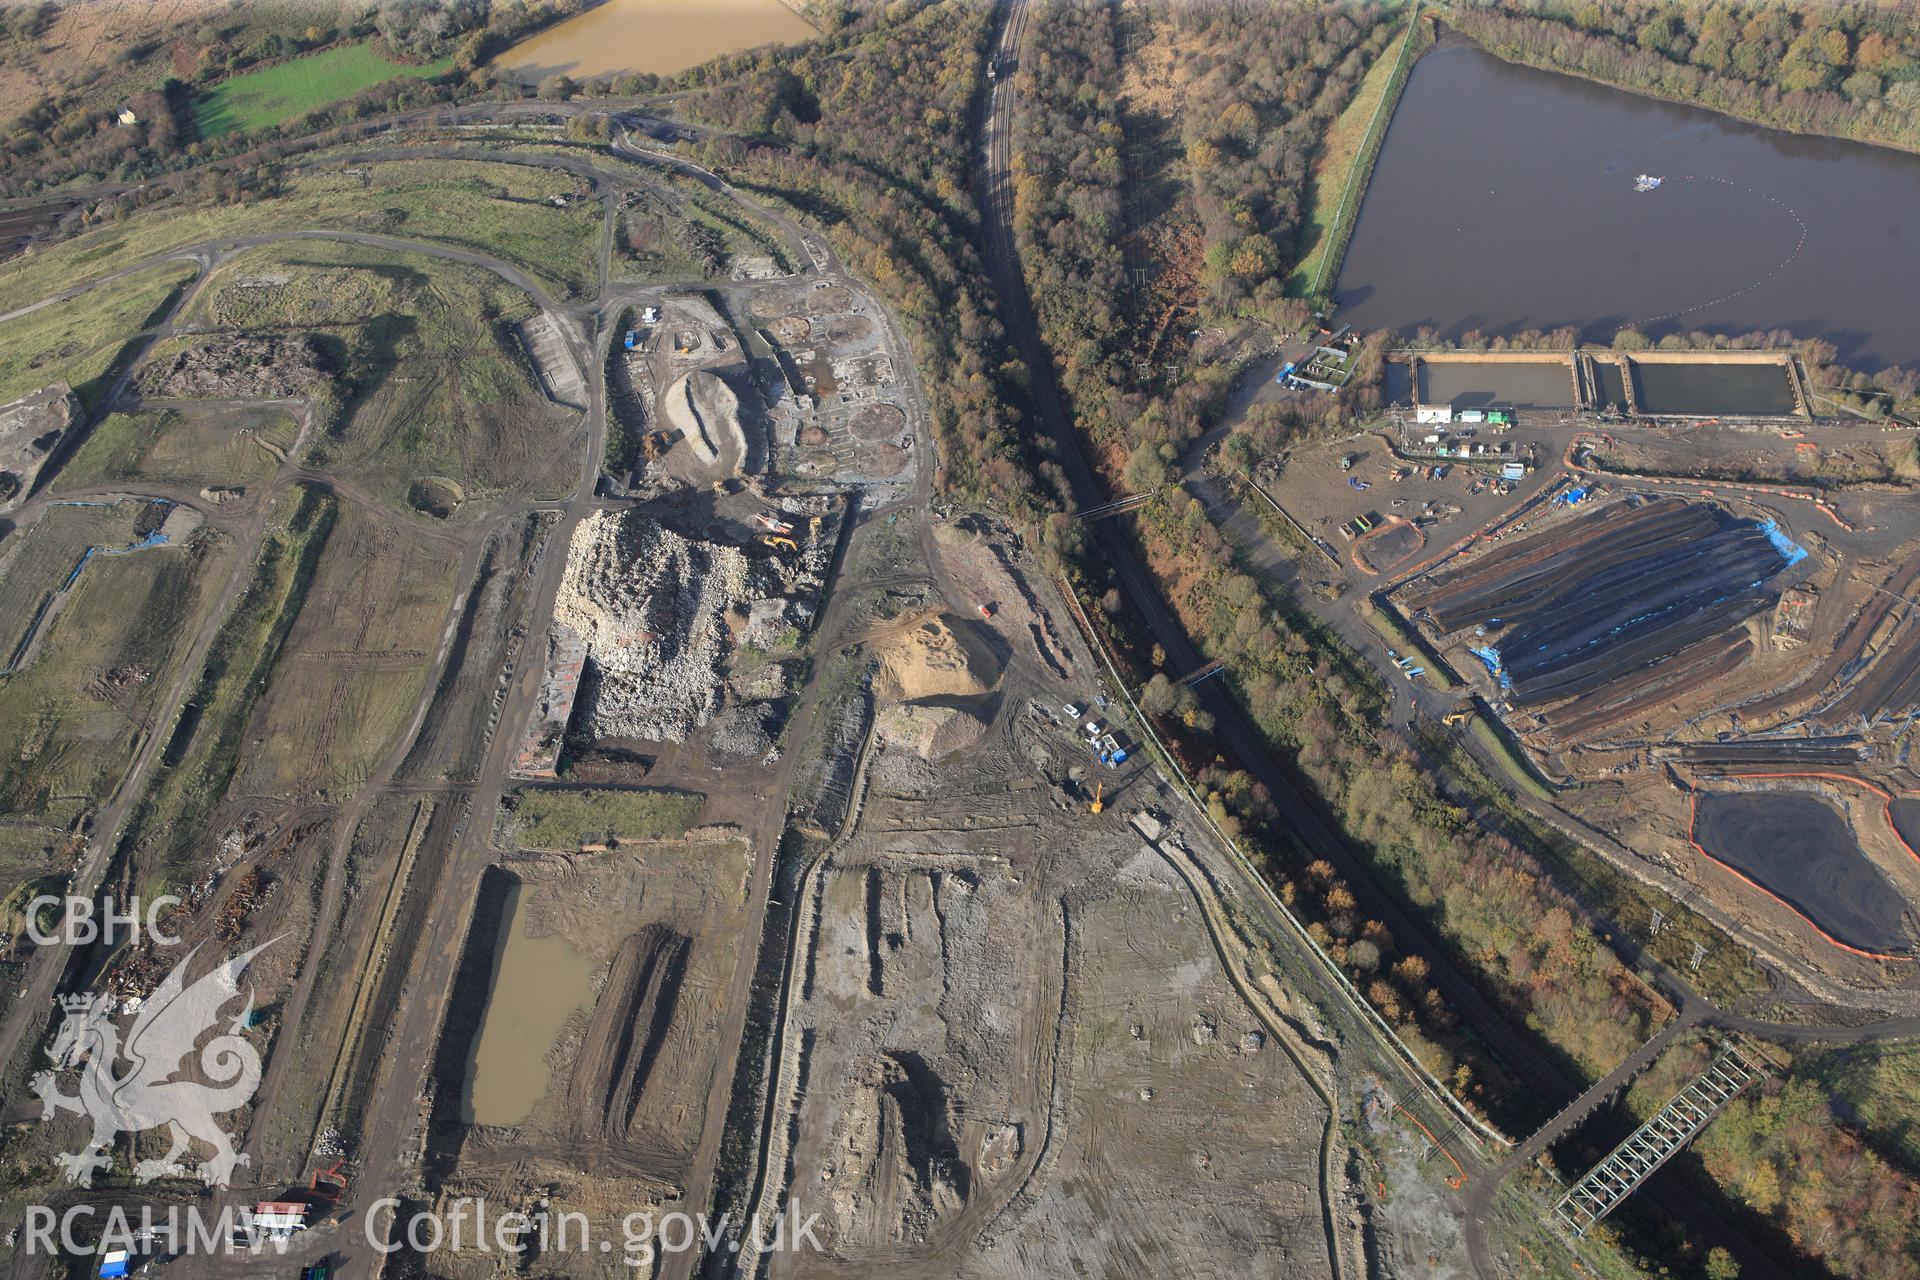 RCAHMW colour oblique photograph of Llandarcy Oil Refinery. Taken by Toby Driver on 17/11/2011.